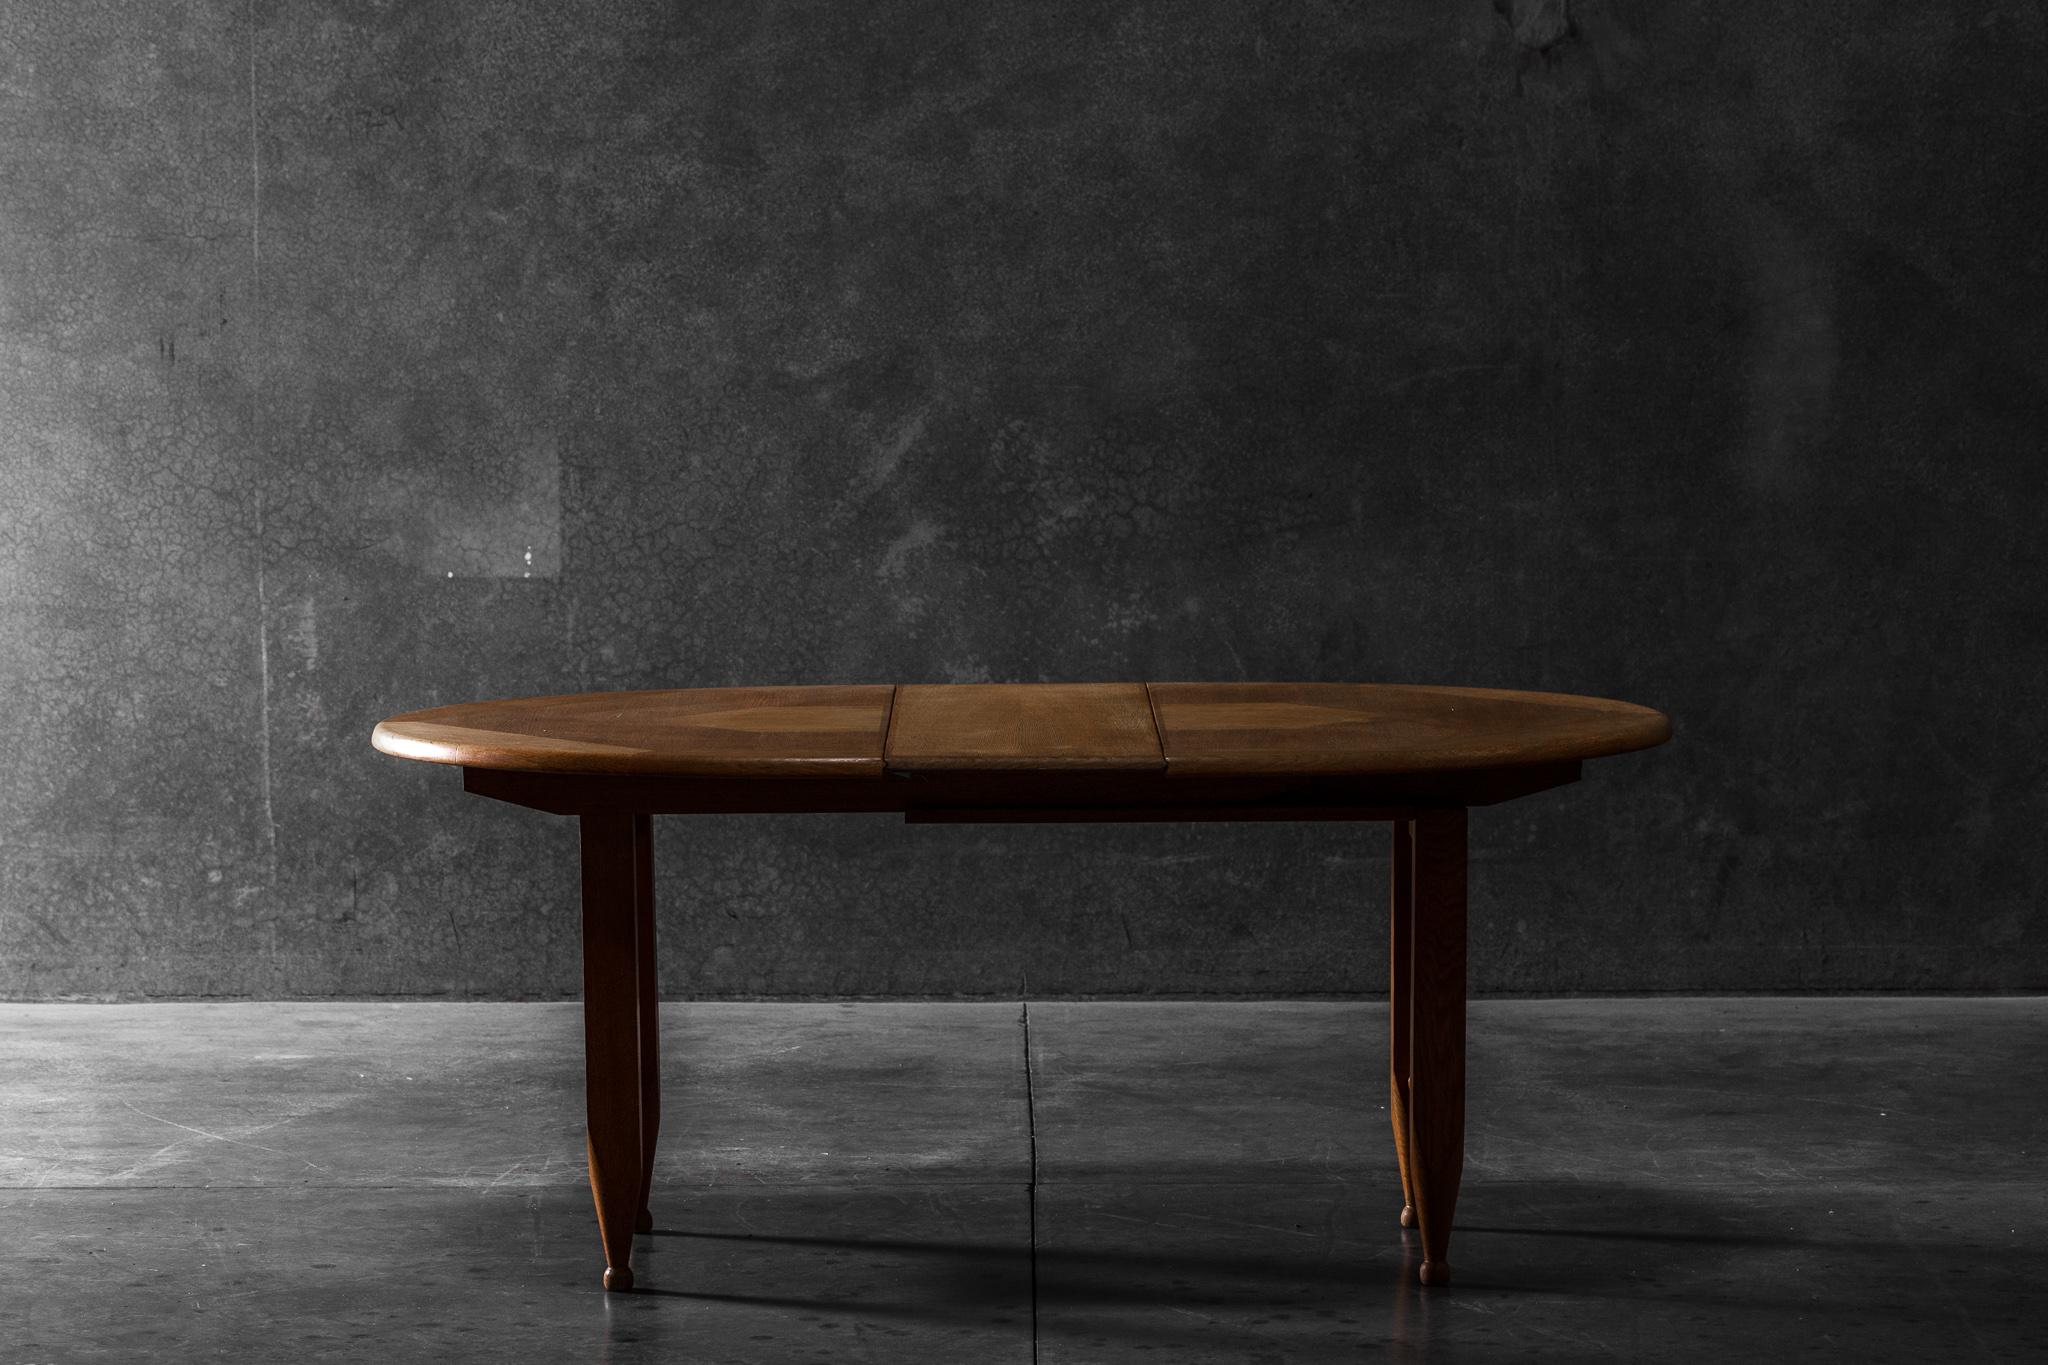 Solid oak extendable dining table with optional leaf by Guillerme et Chambron. Made in France circa 1960s.

Dimensions with leaf: 68